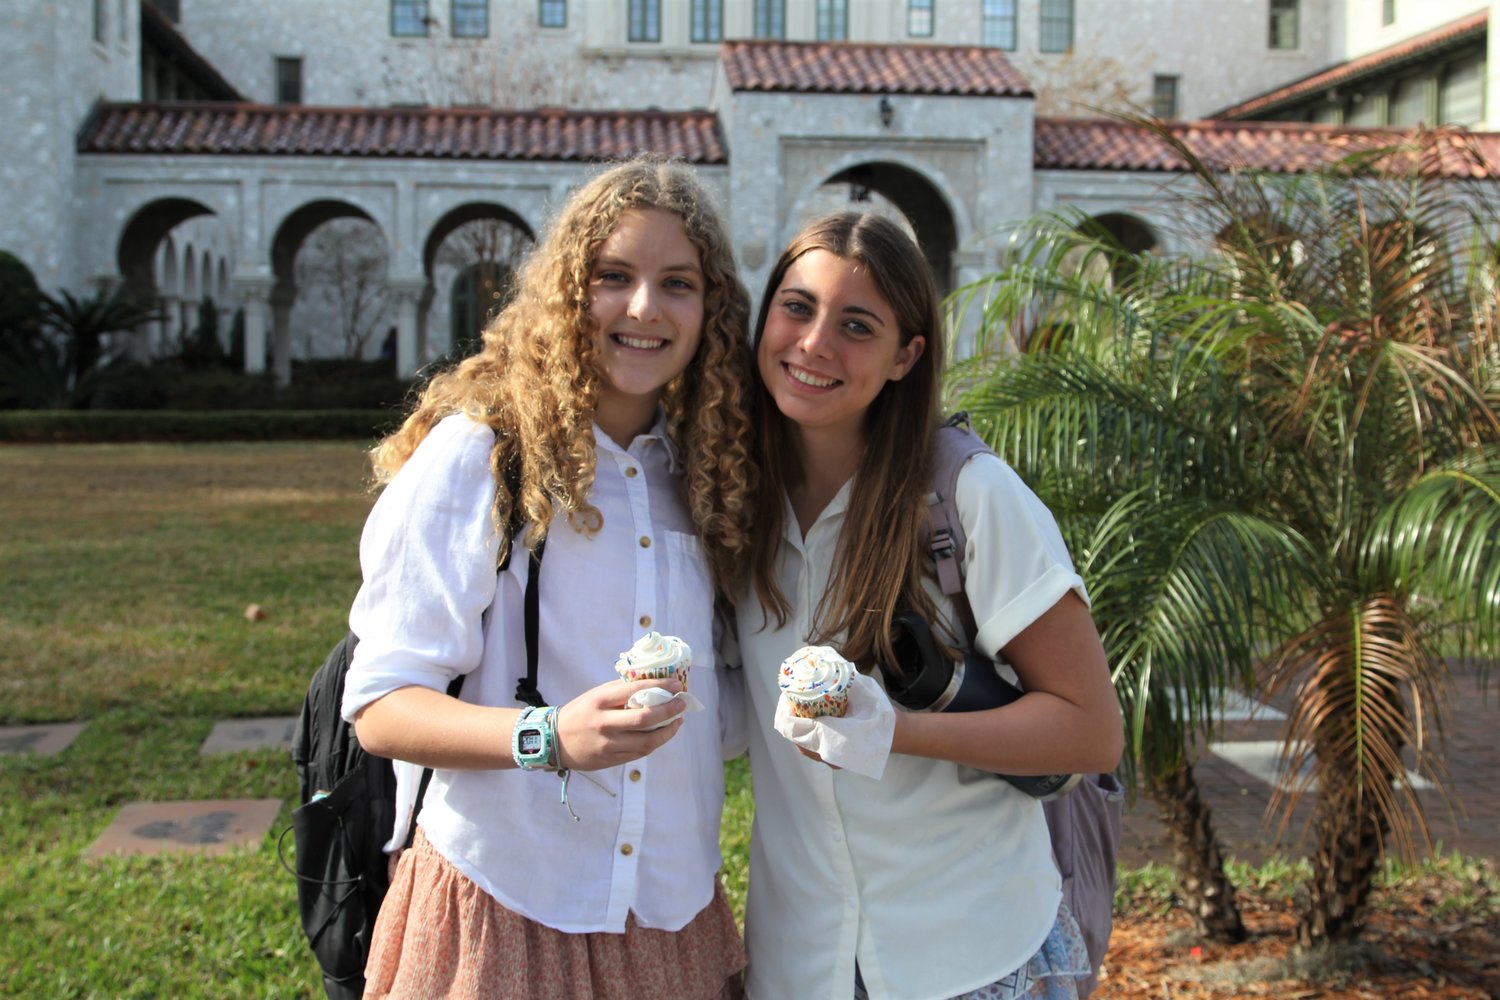 Two Bolles students prepare to enjoy their Founders’ Day cupcakes.